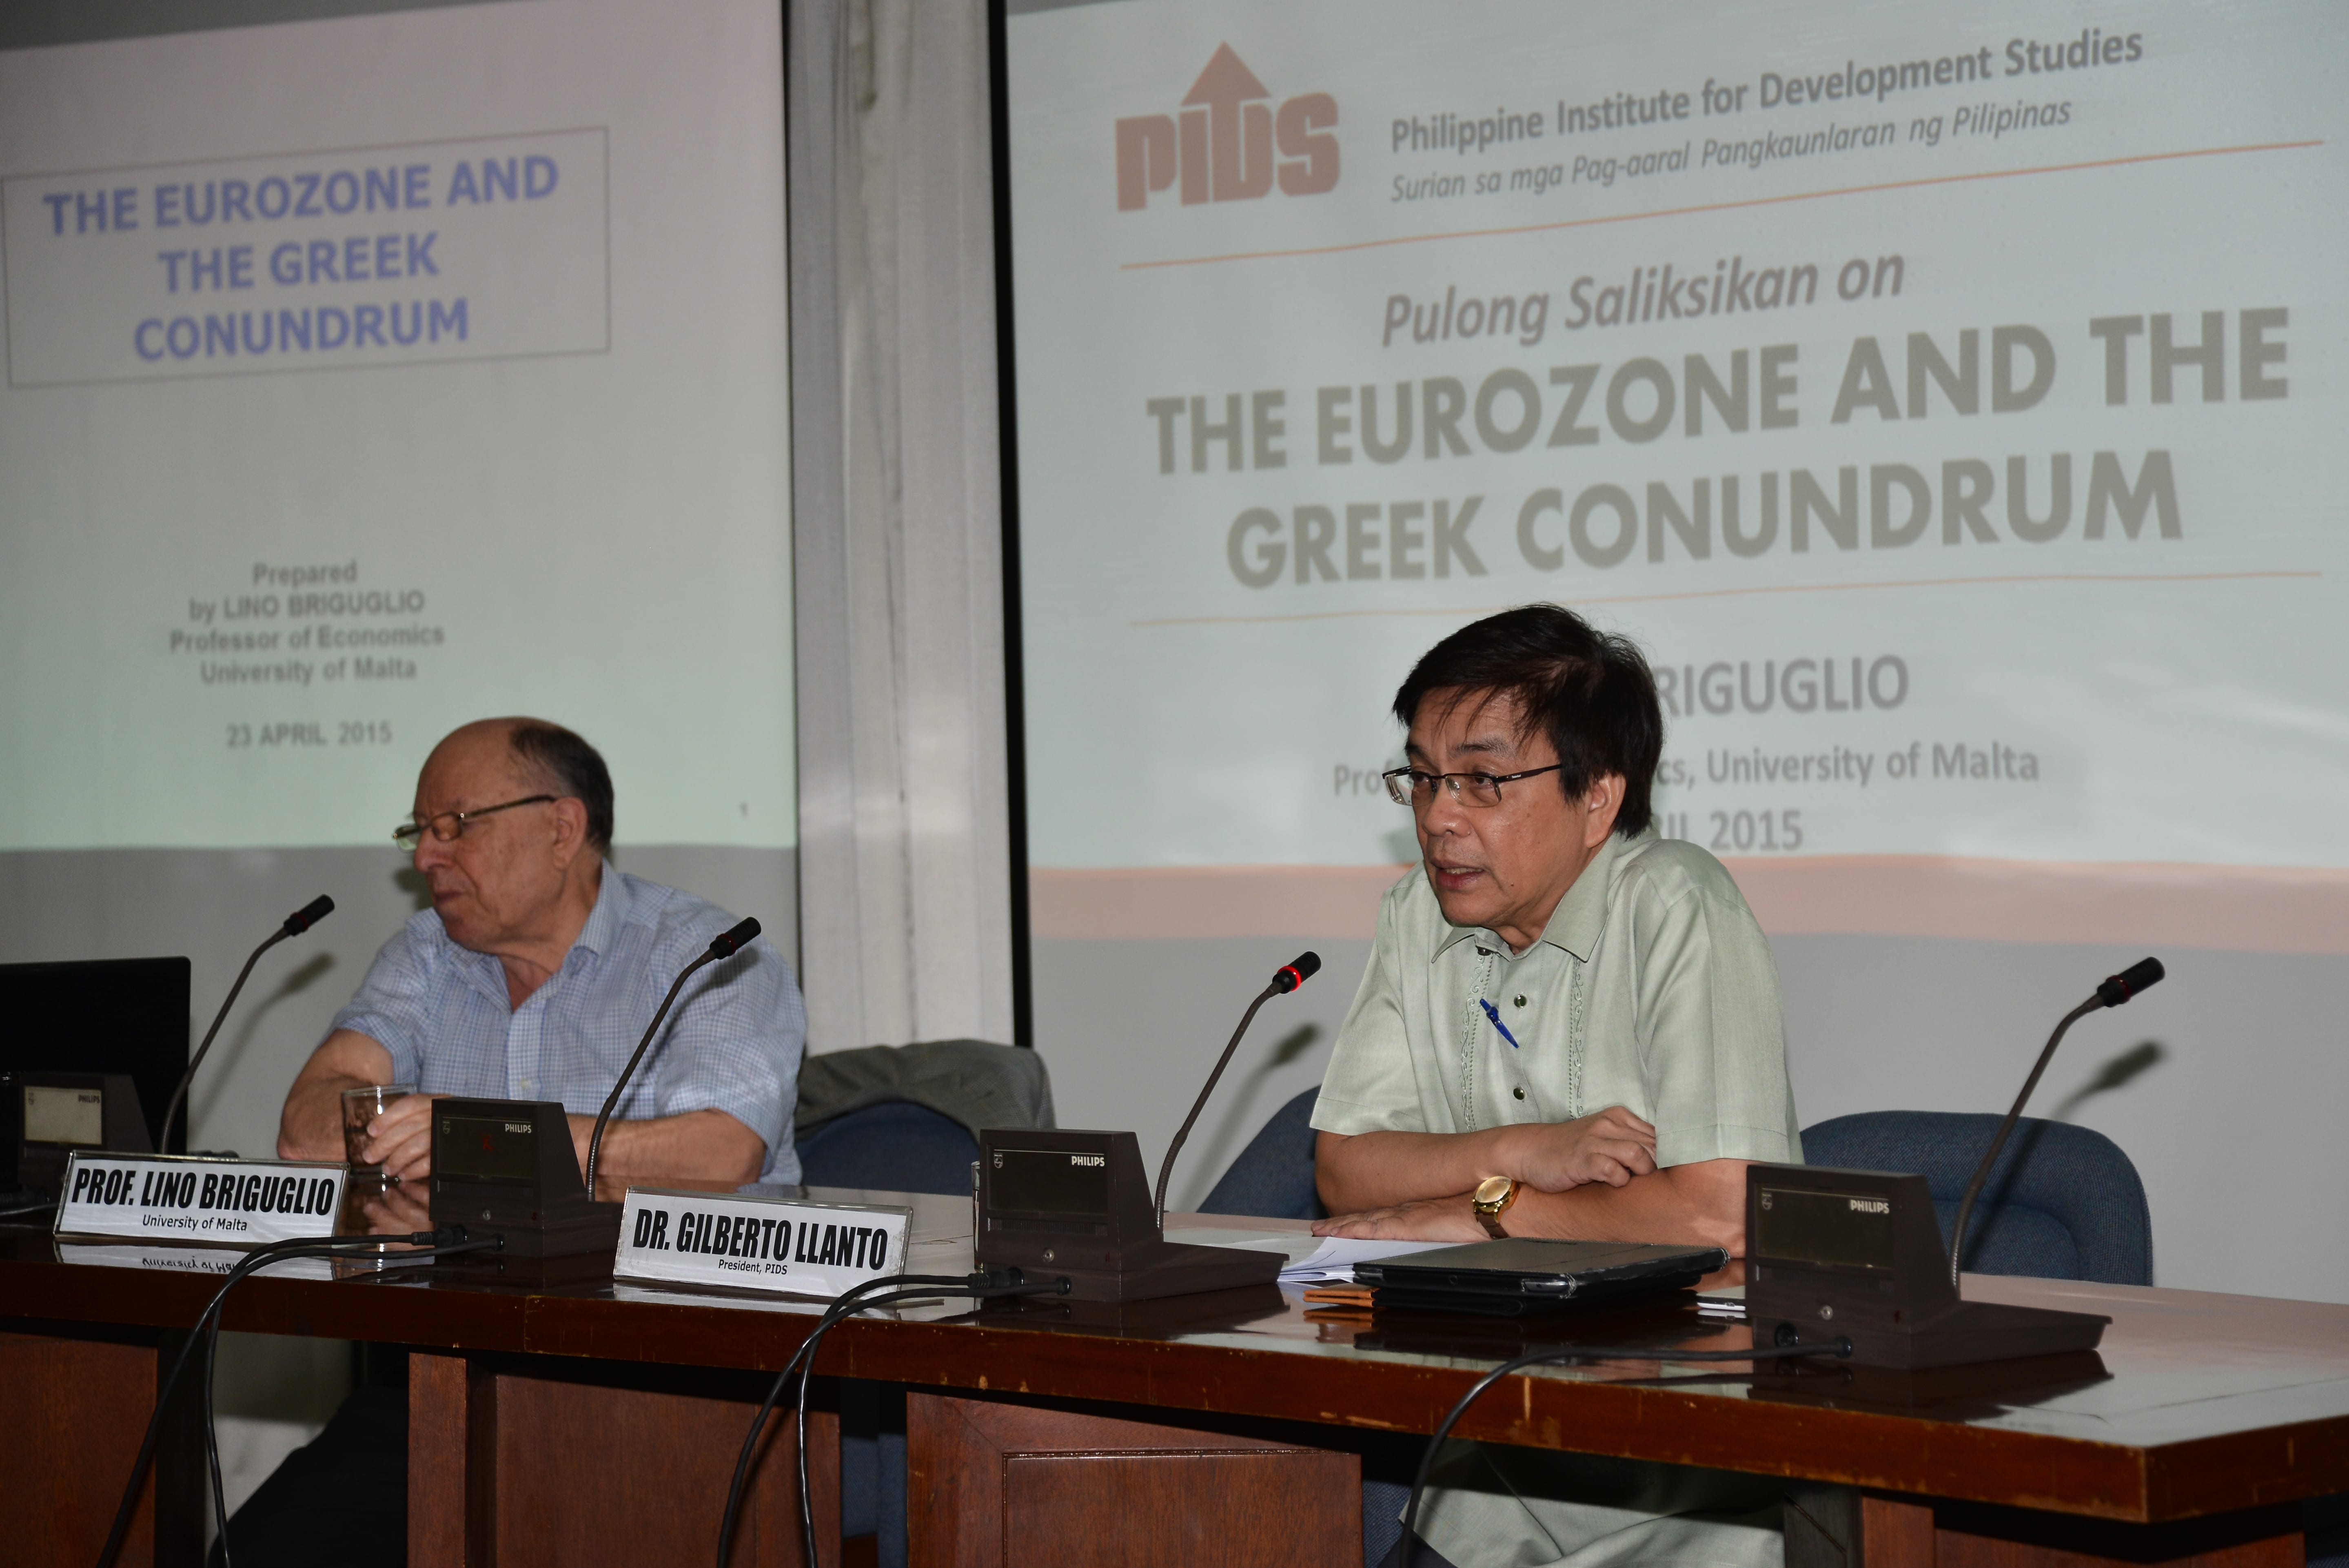 PIDS-CPBRD Forum Series: A System-wide Study of the Logistics Industry in the Greater Capital Region-DSC_1259.jpg